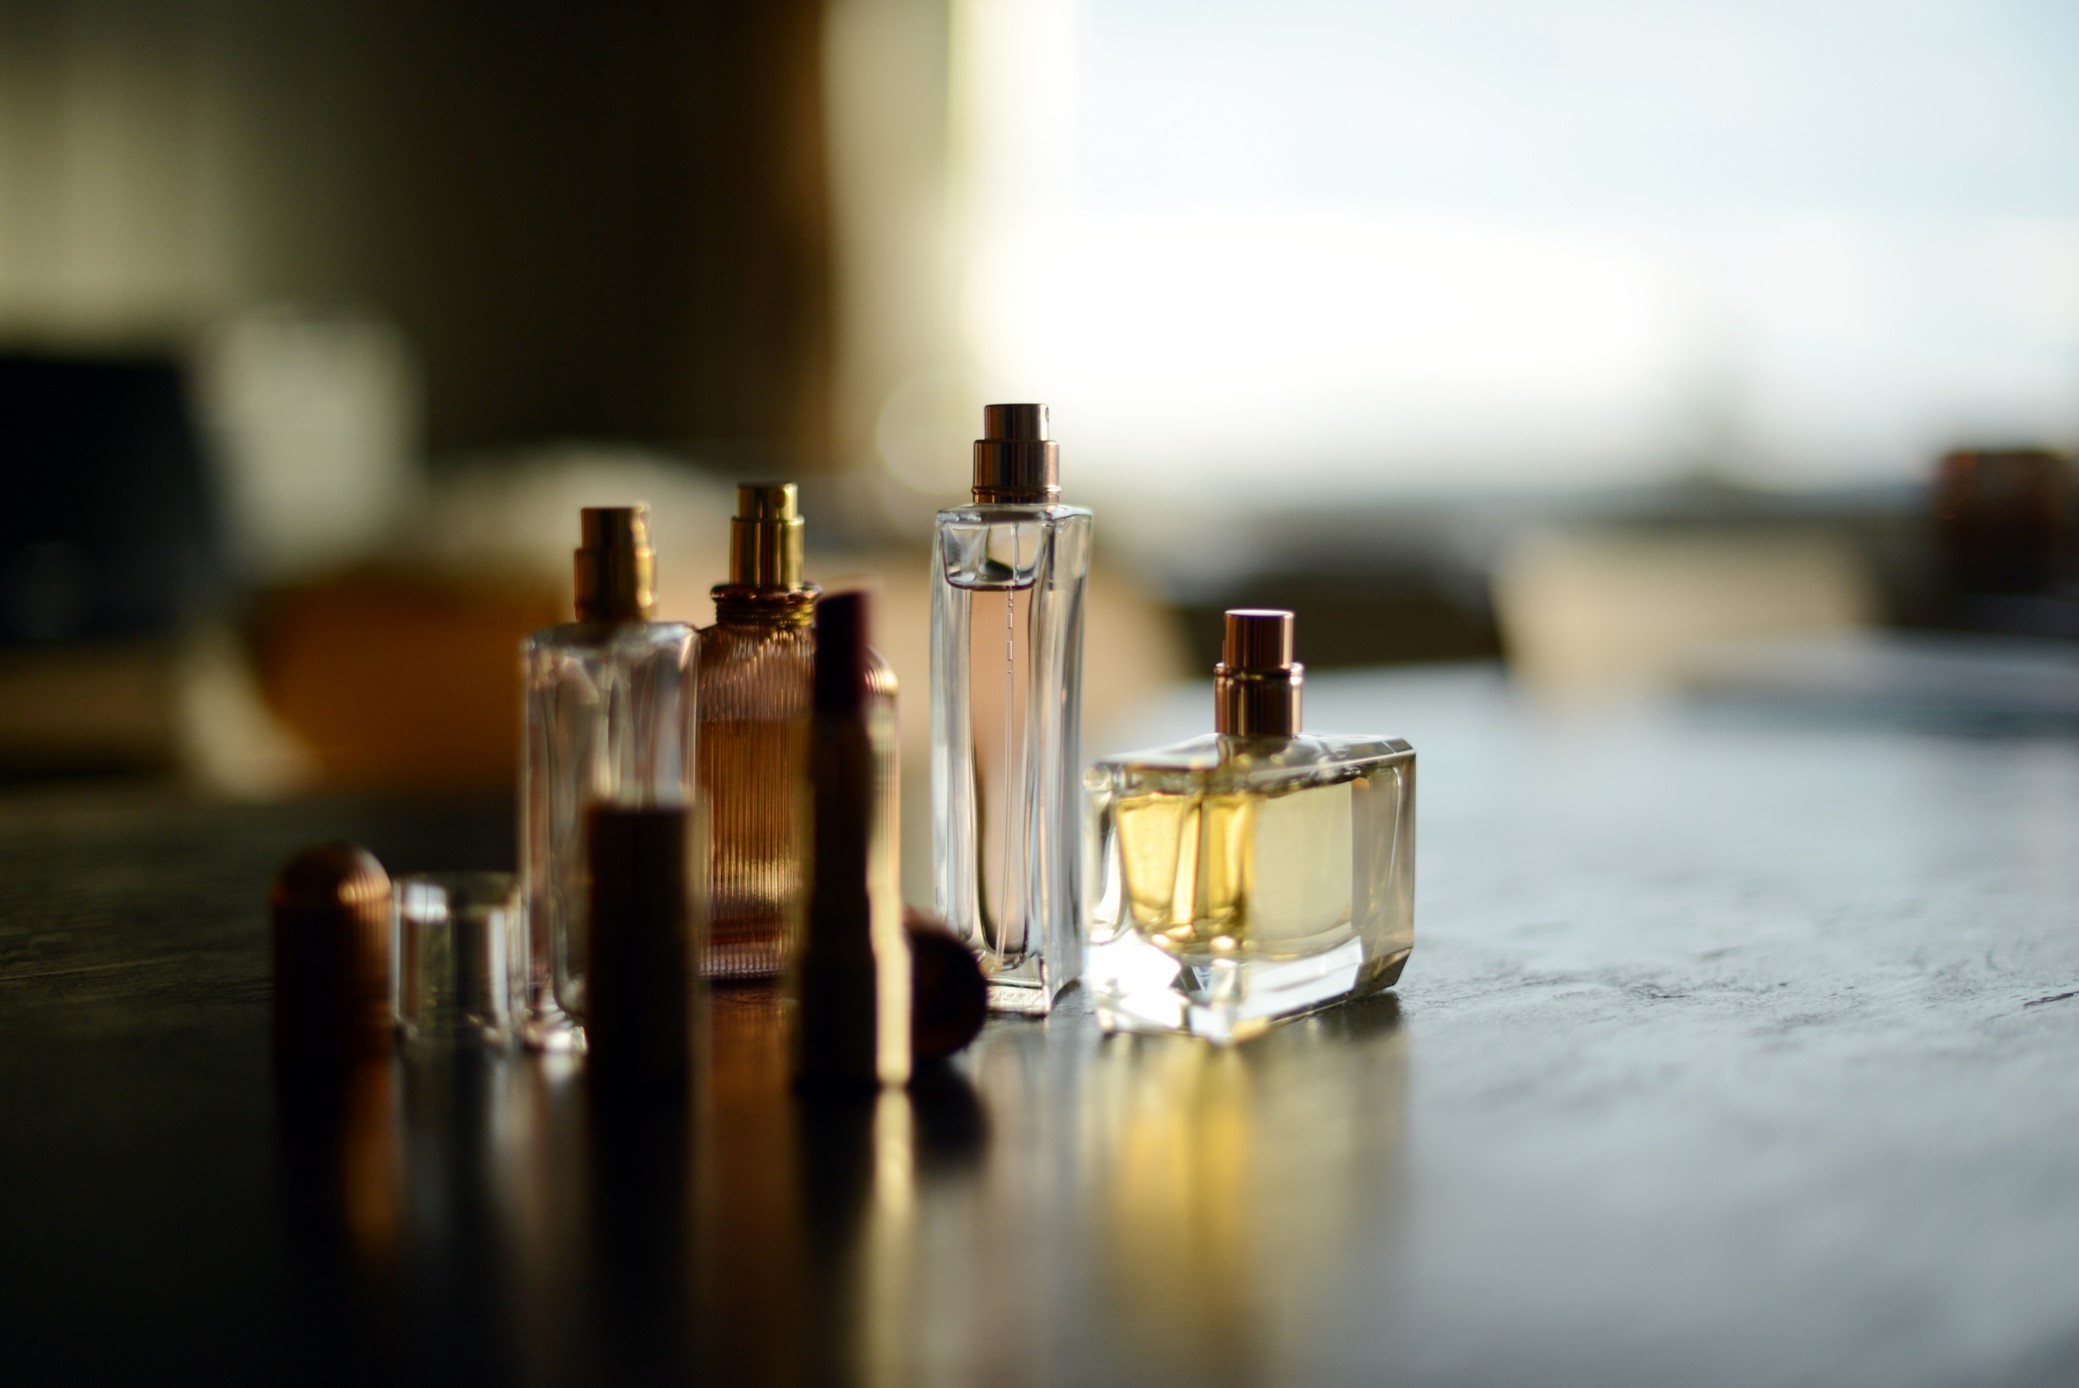 Can reporting on dupes of famous perfumes amount to trademark